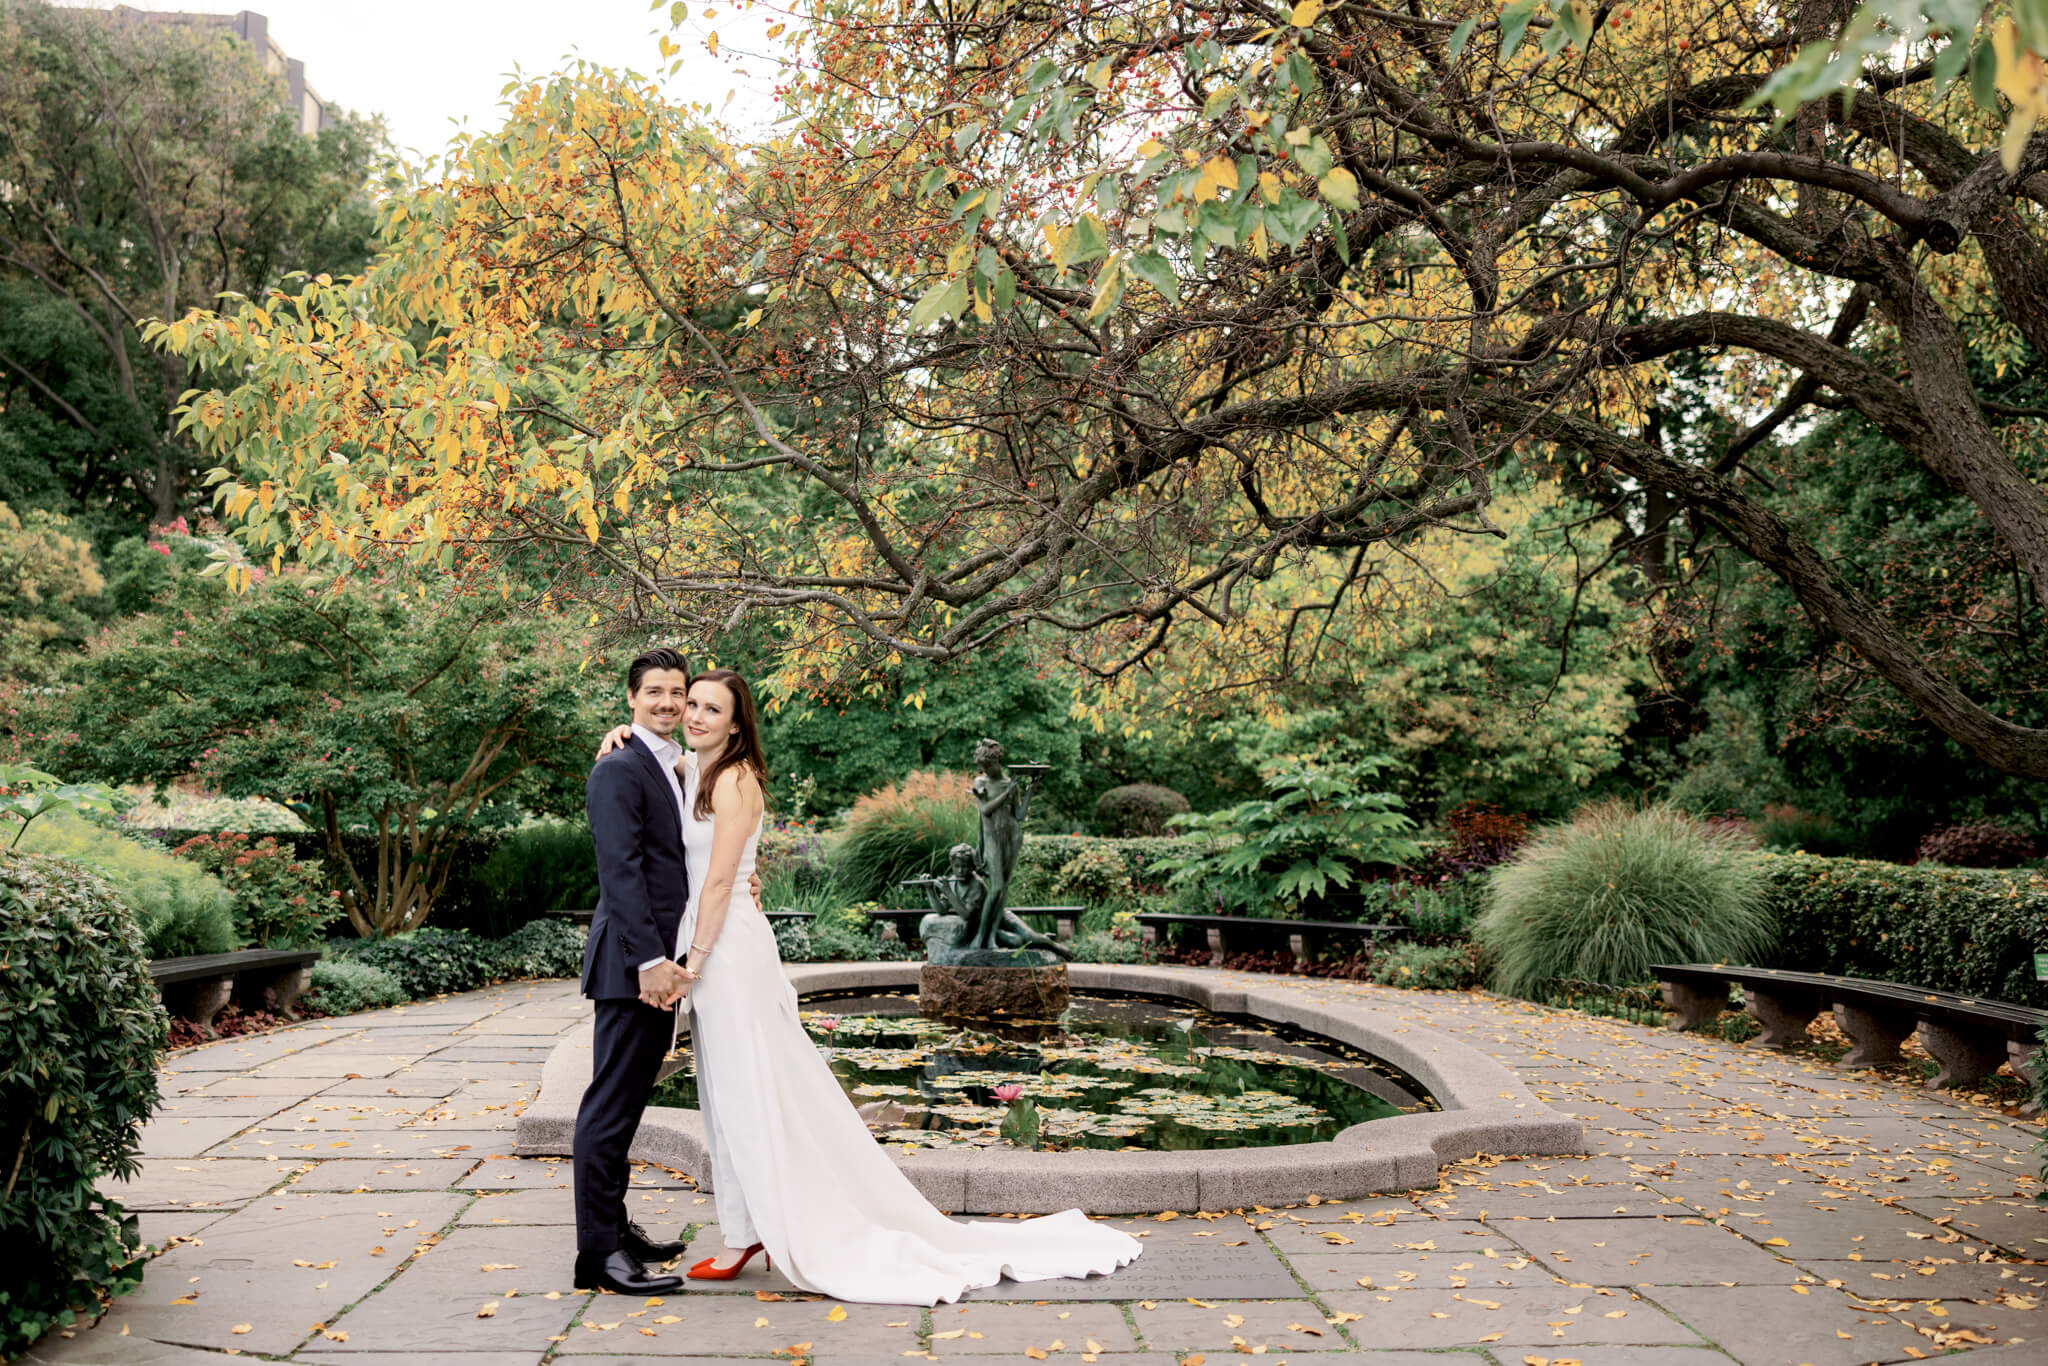 The bride and groom are standing in the middle of the lovely Conservatory Garden. Image by Jenny Fu Studio